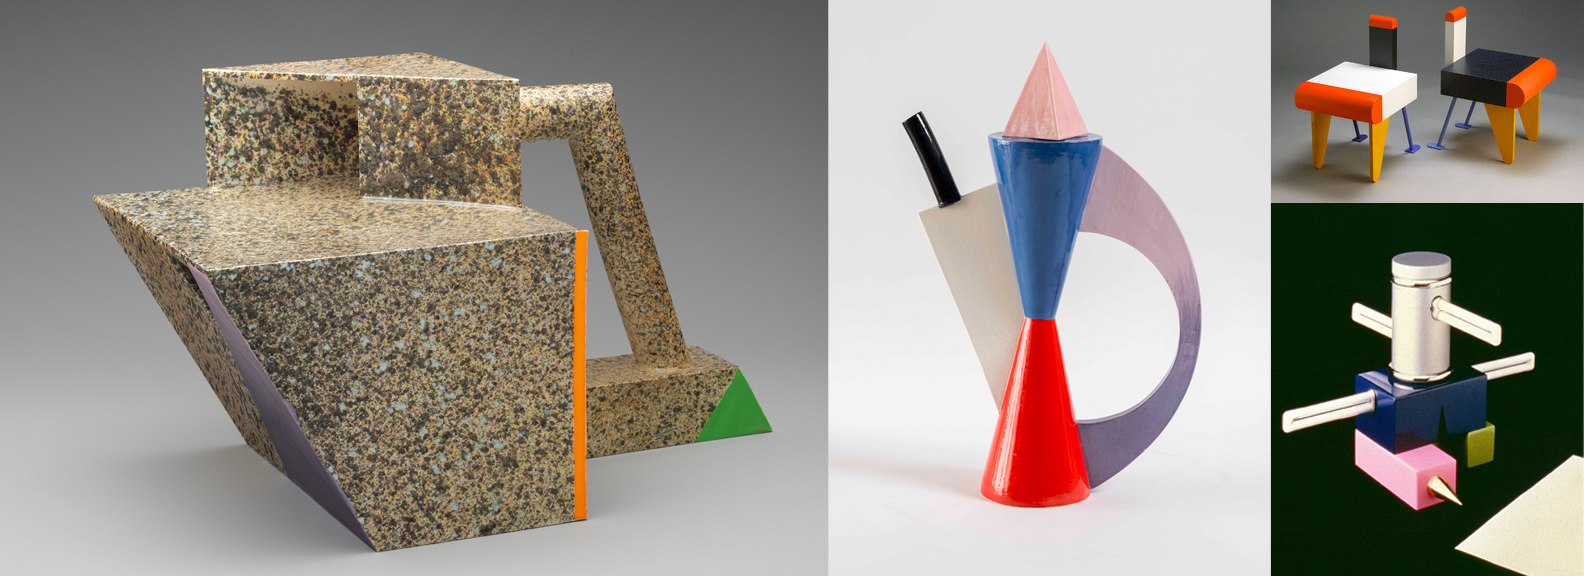 Peter Shire, different objects. Courtesy of Peter Shire